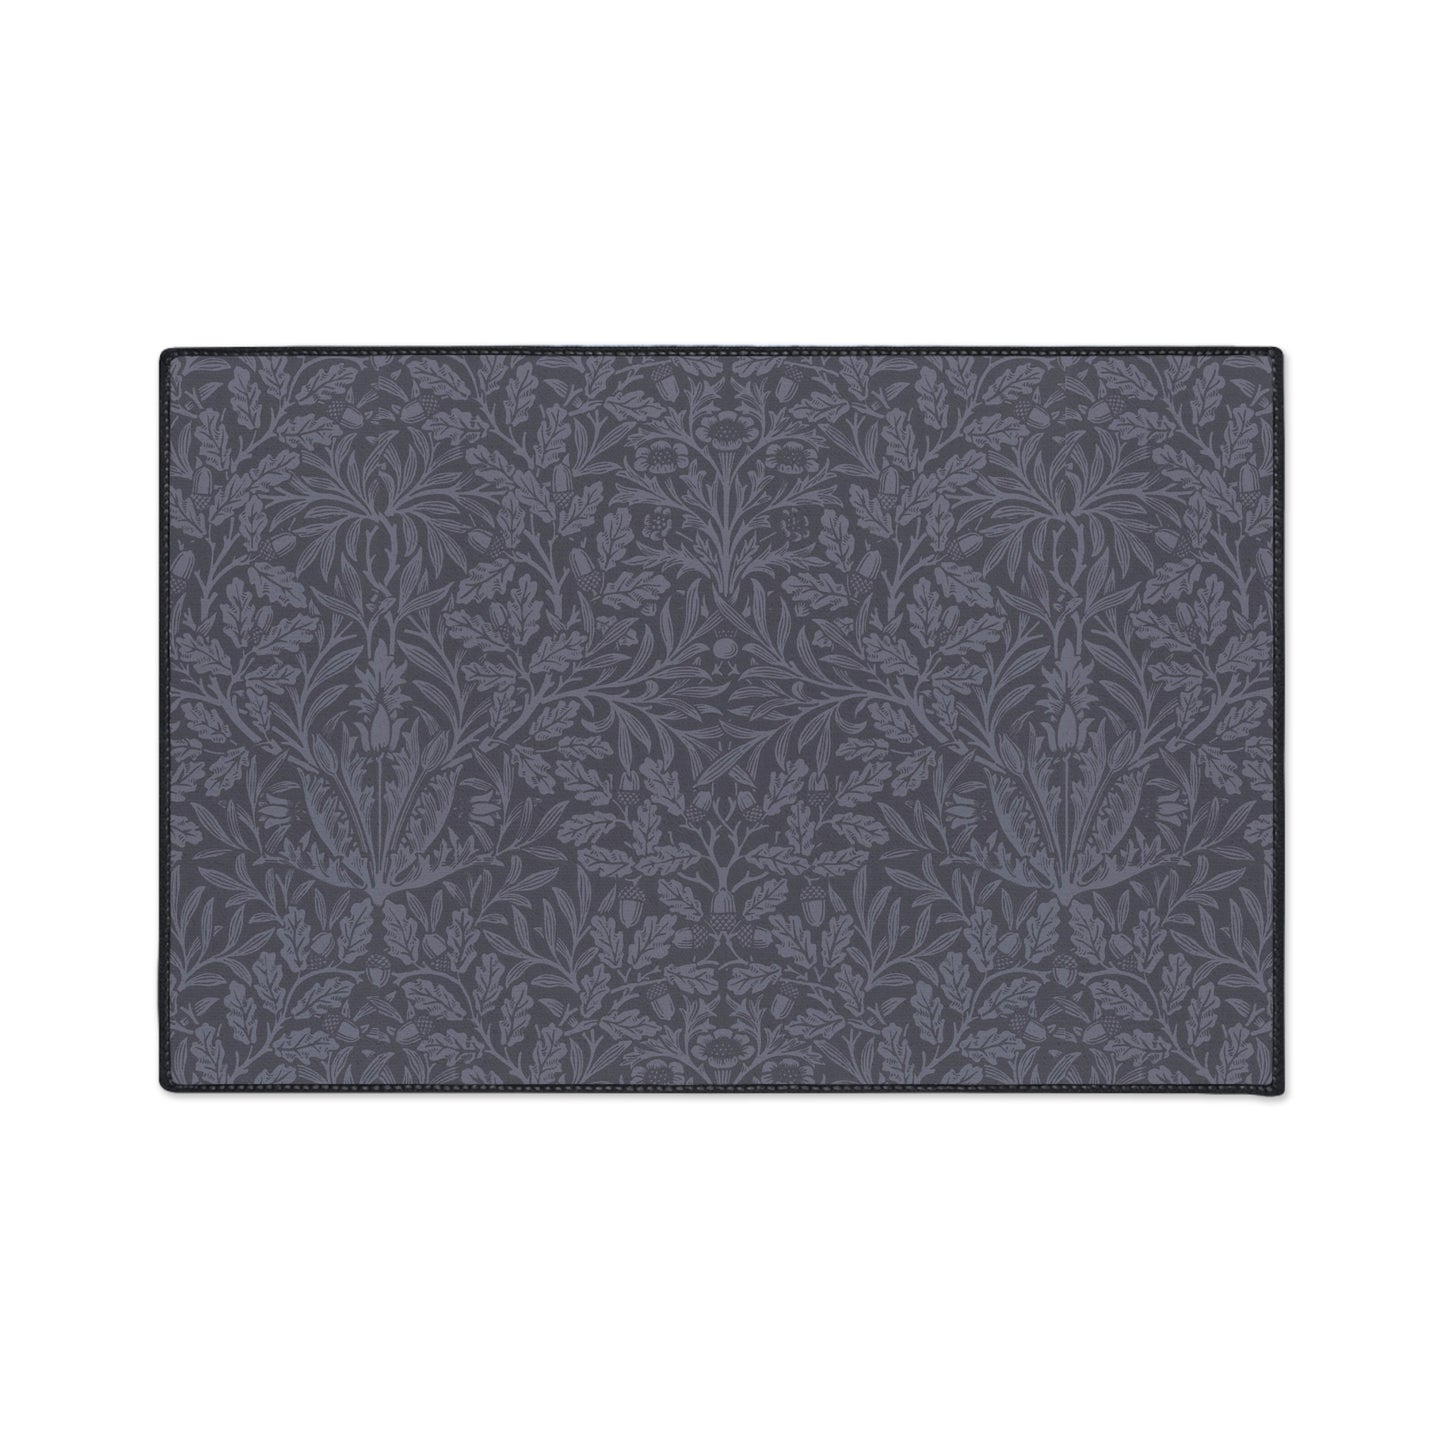 william-morris-co-heavy-duty-floor-mat-acorns-and-oak-leaves-collection-smoky-blue-3